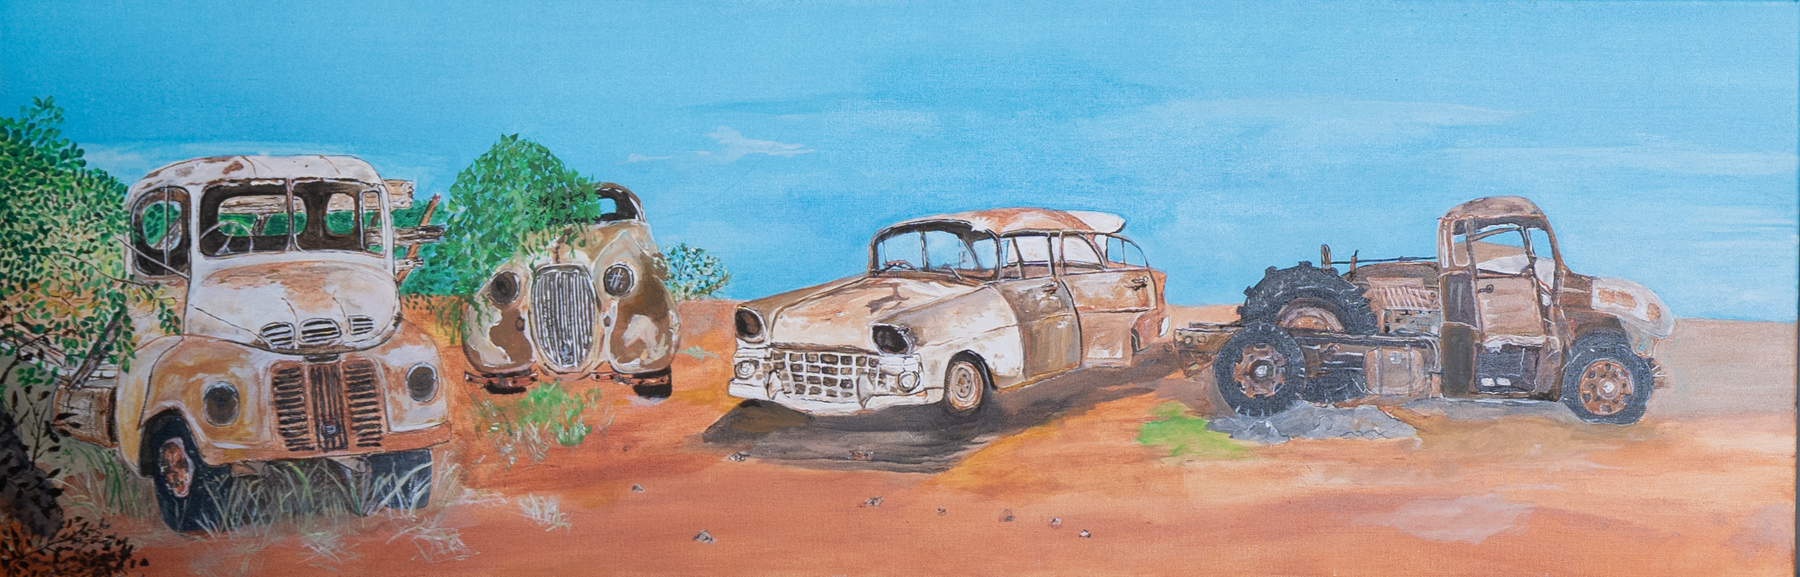 Painting of rusty cars under a blue sky